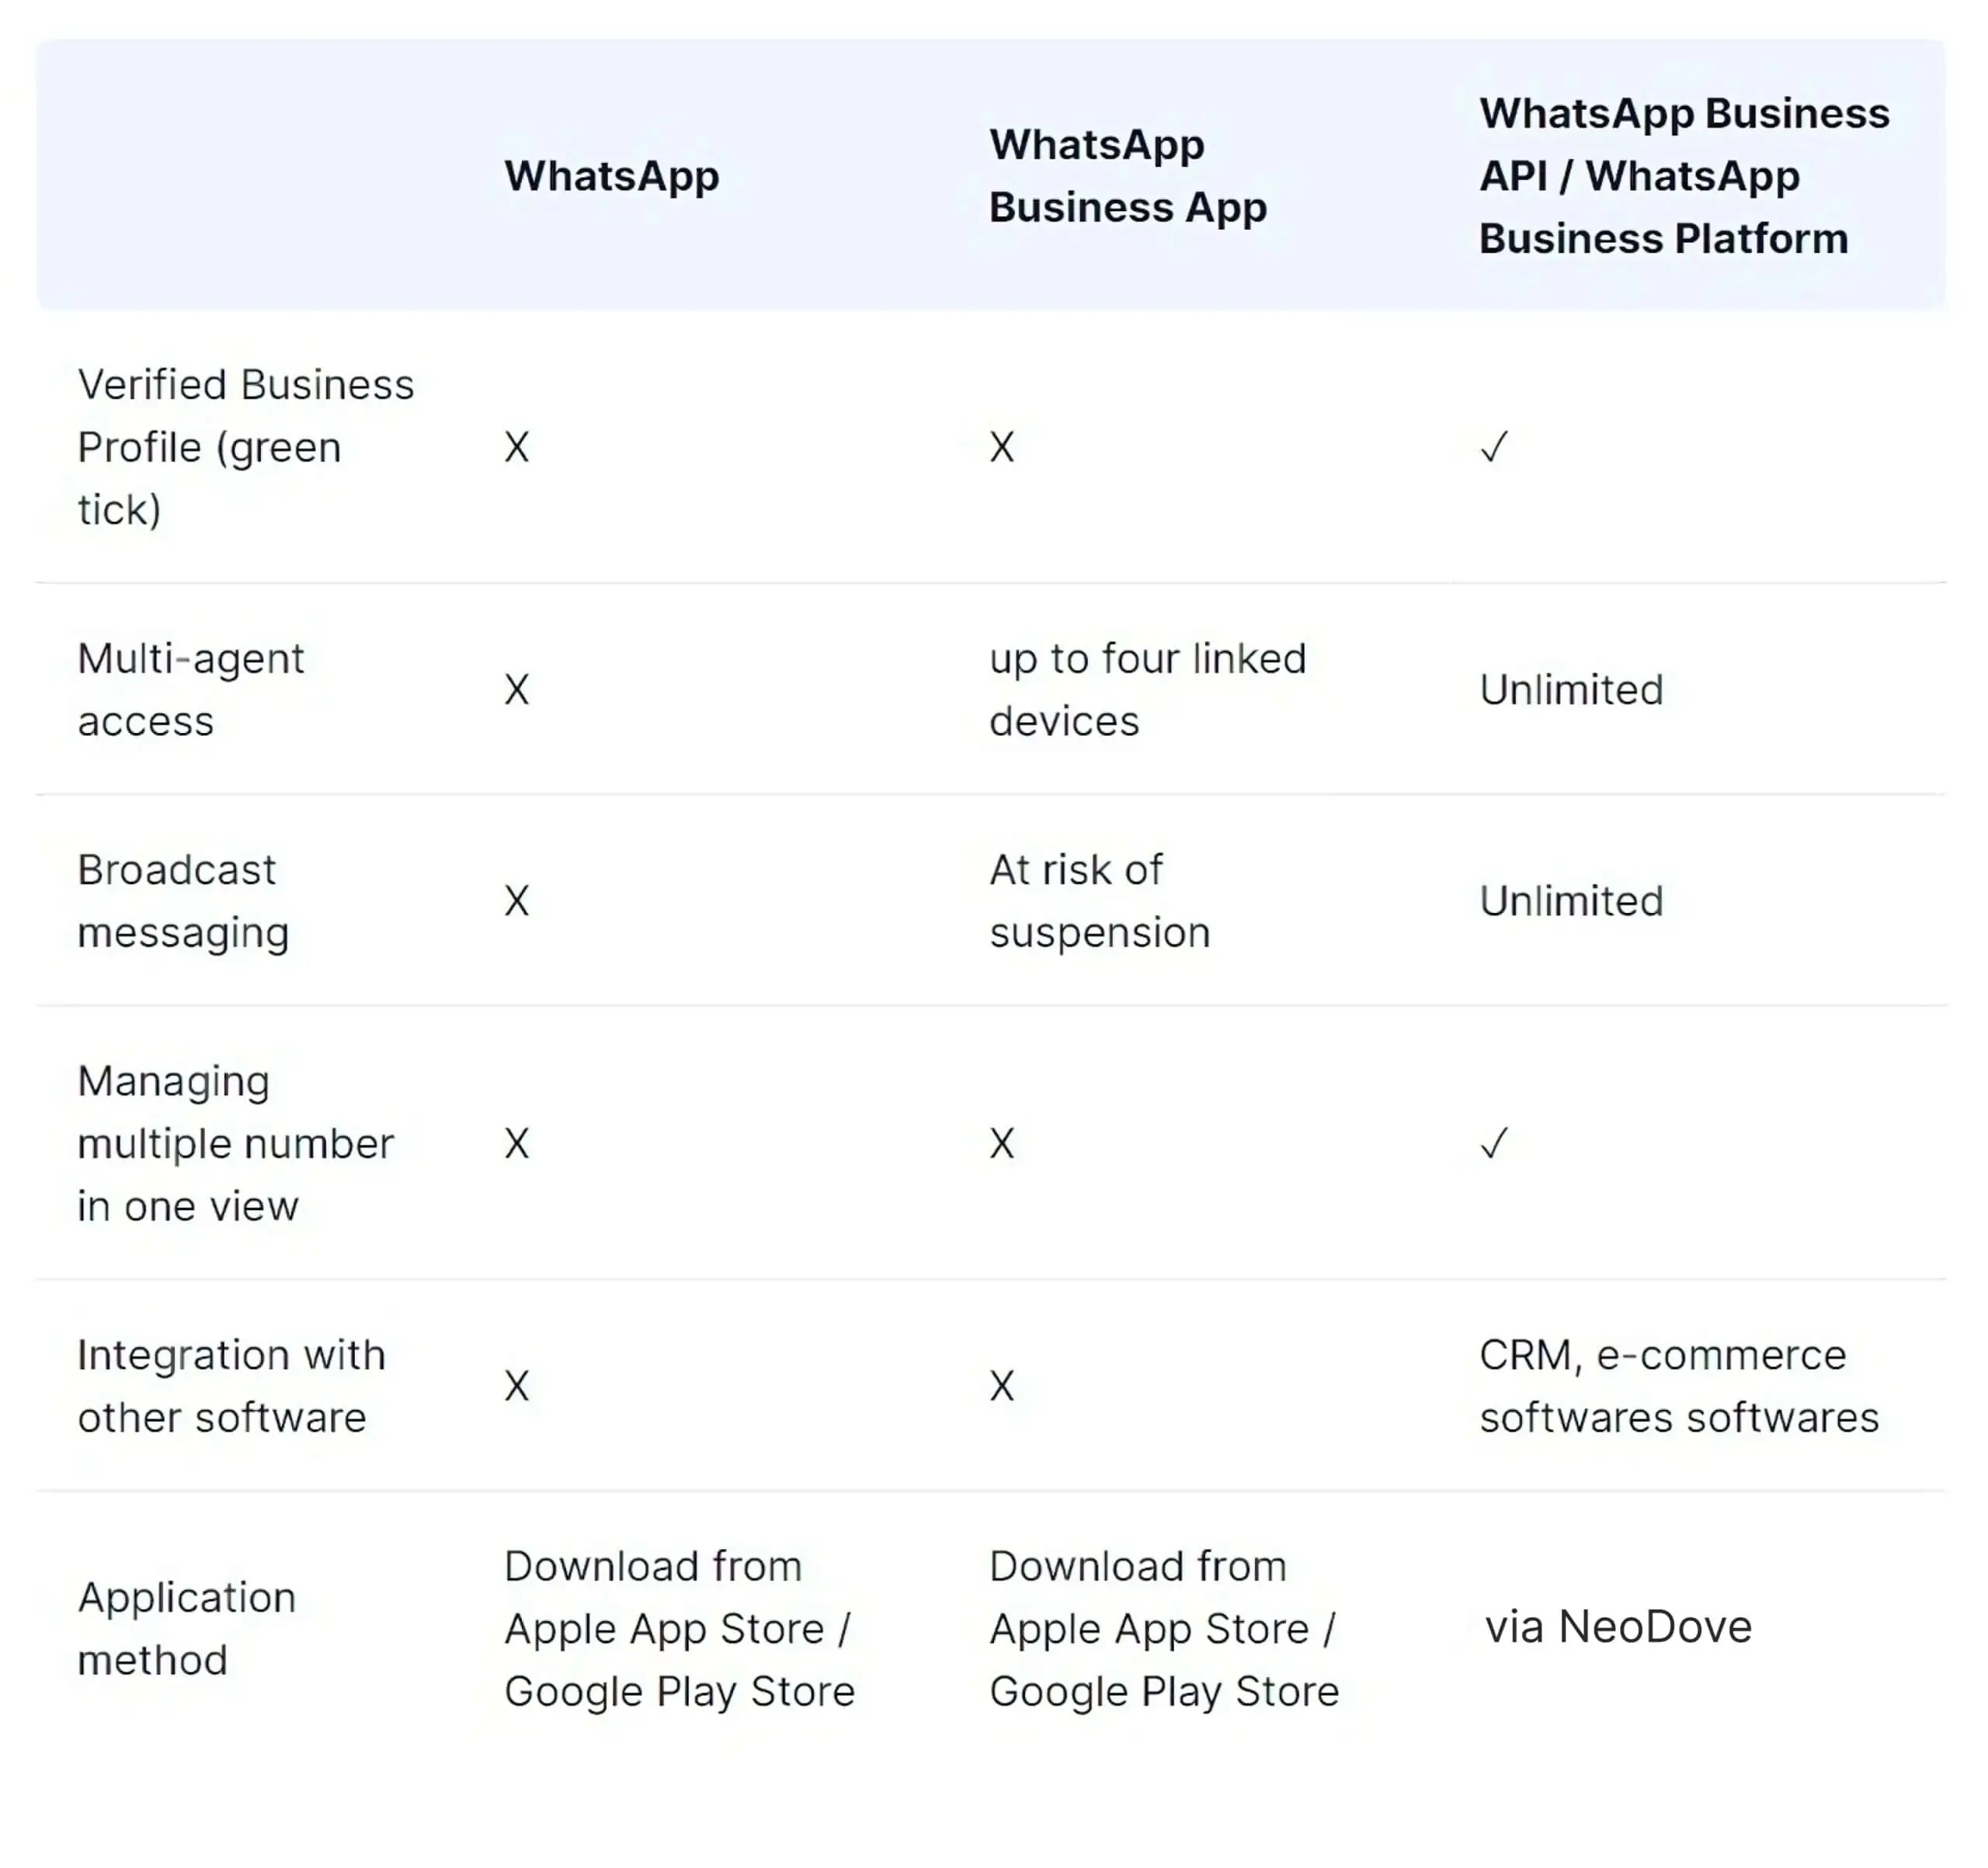 Difference between WhatsApp and WhatsApp Business App l NeoDove